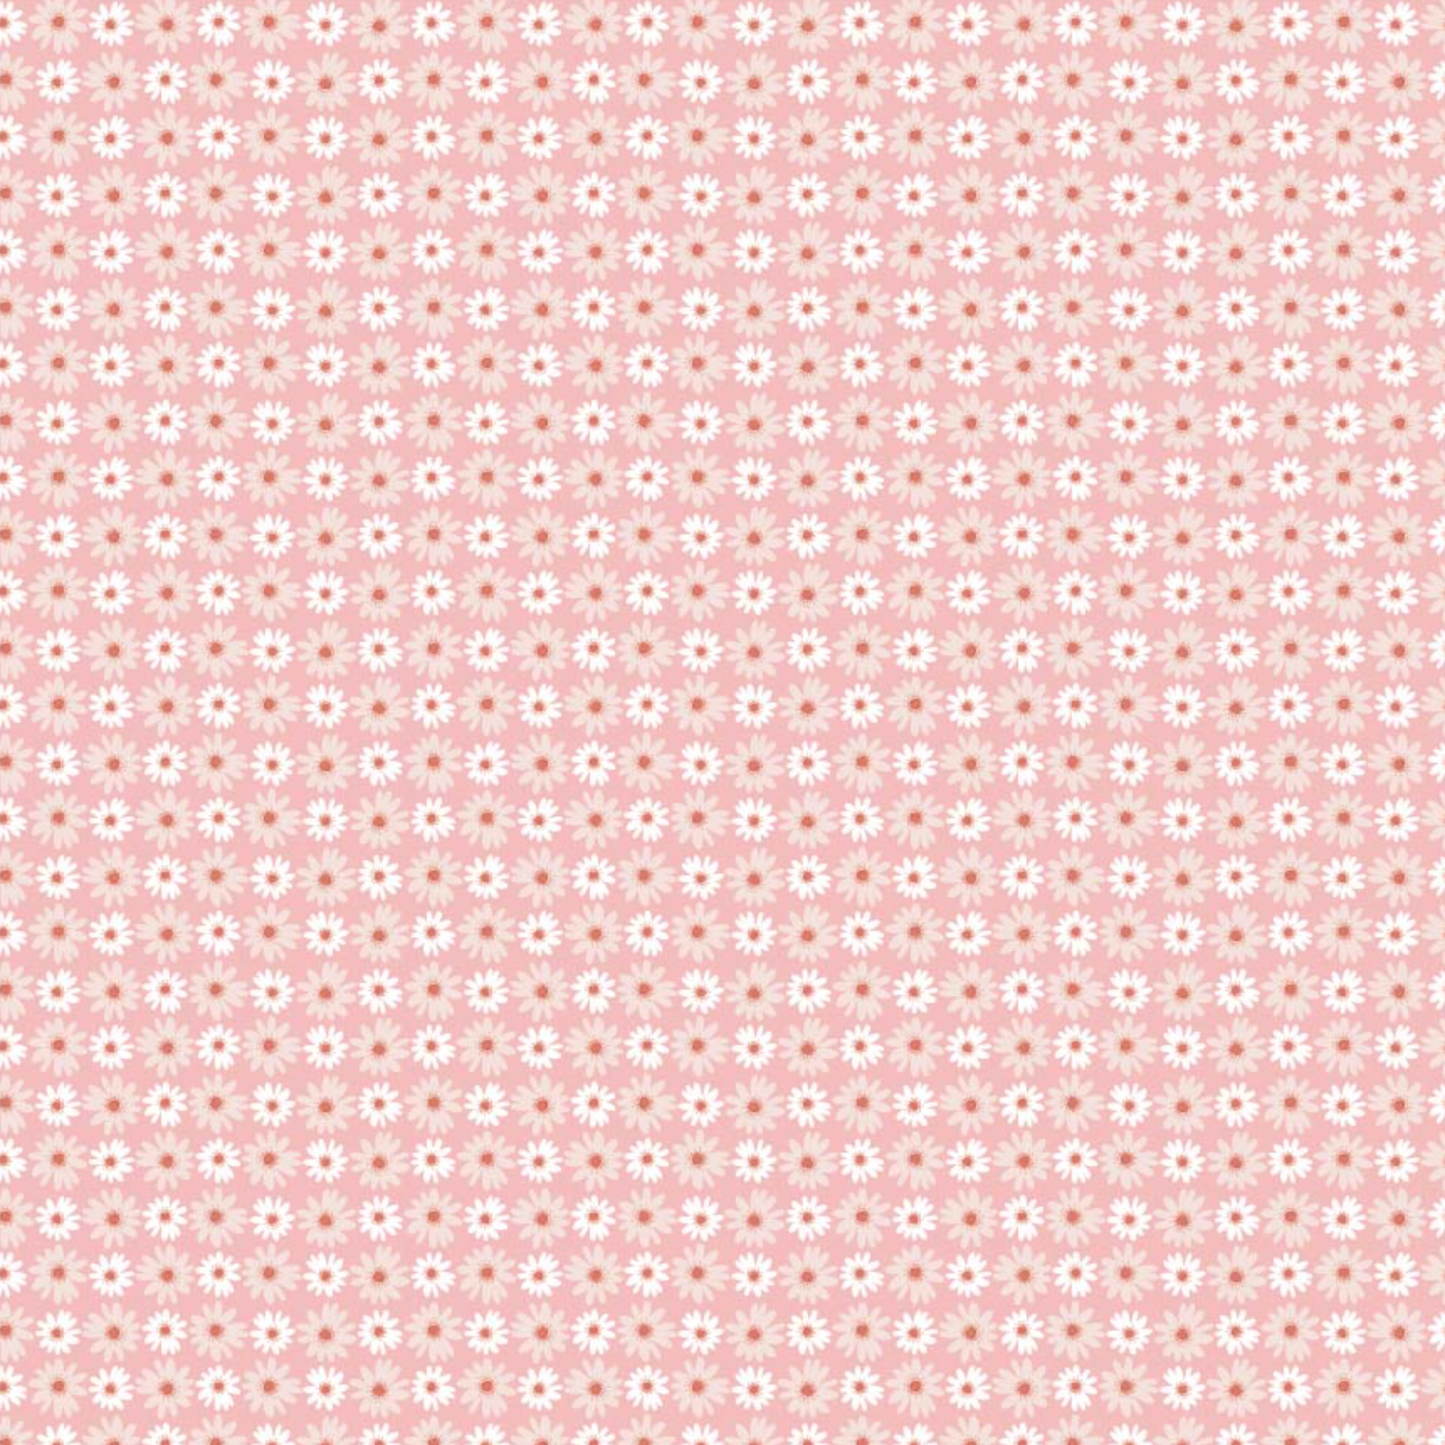 Nature Sings Fabric, Daisy Bunch, Pink, NS24104, sold by the 1/2 yard, *PREORDER